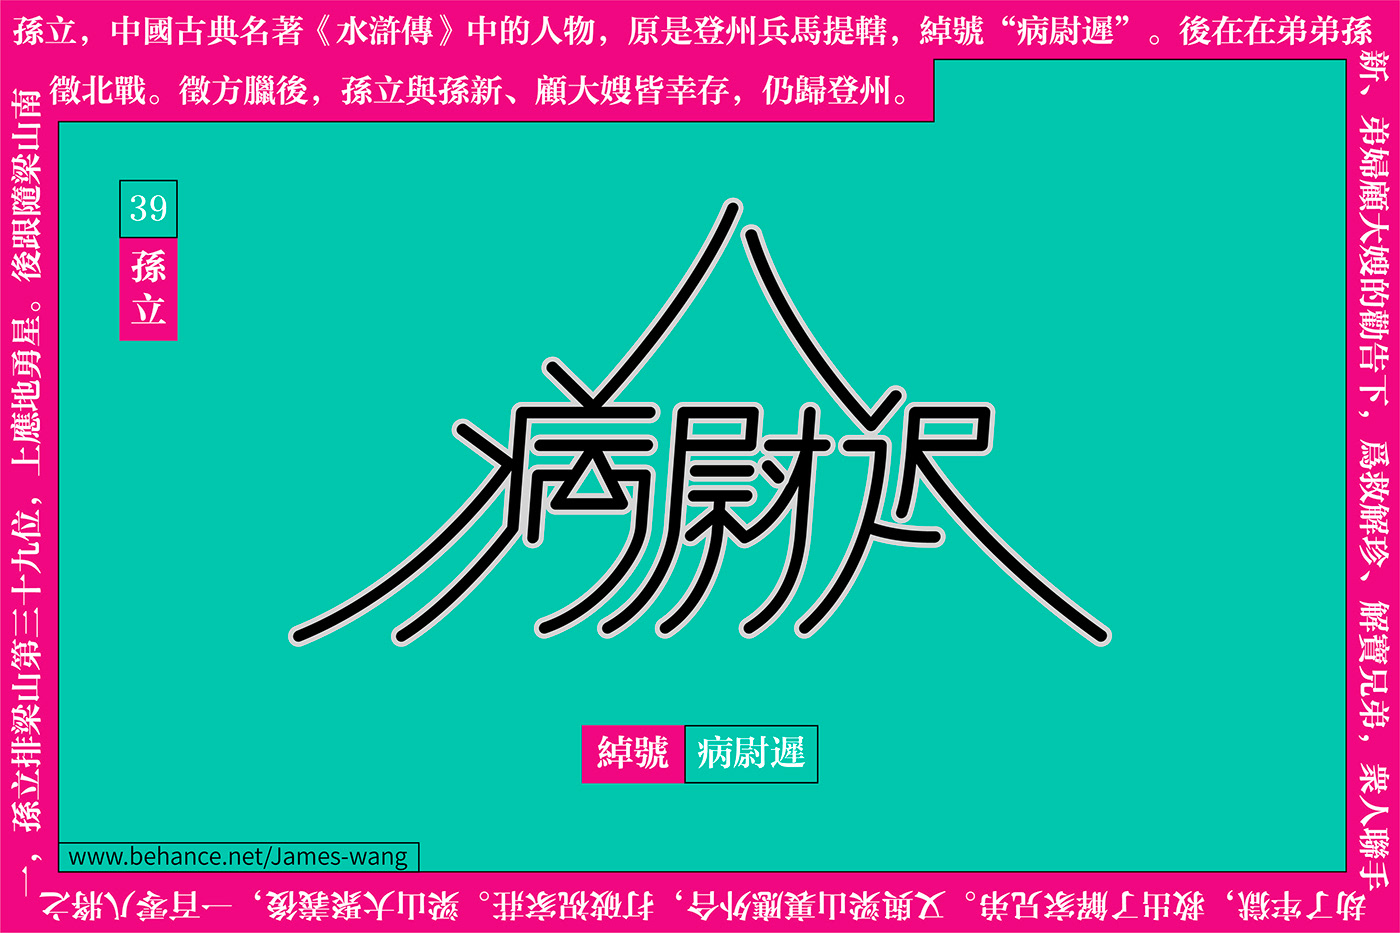 china font font design graphic Typeface 图形 字体 字体设计 水浒传 汉字